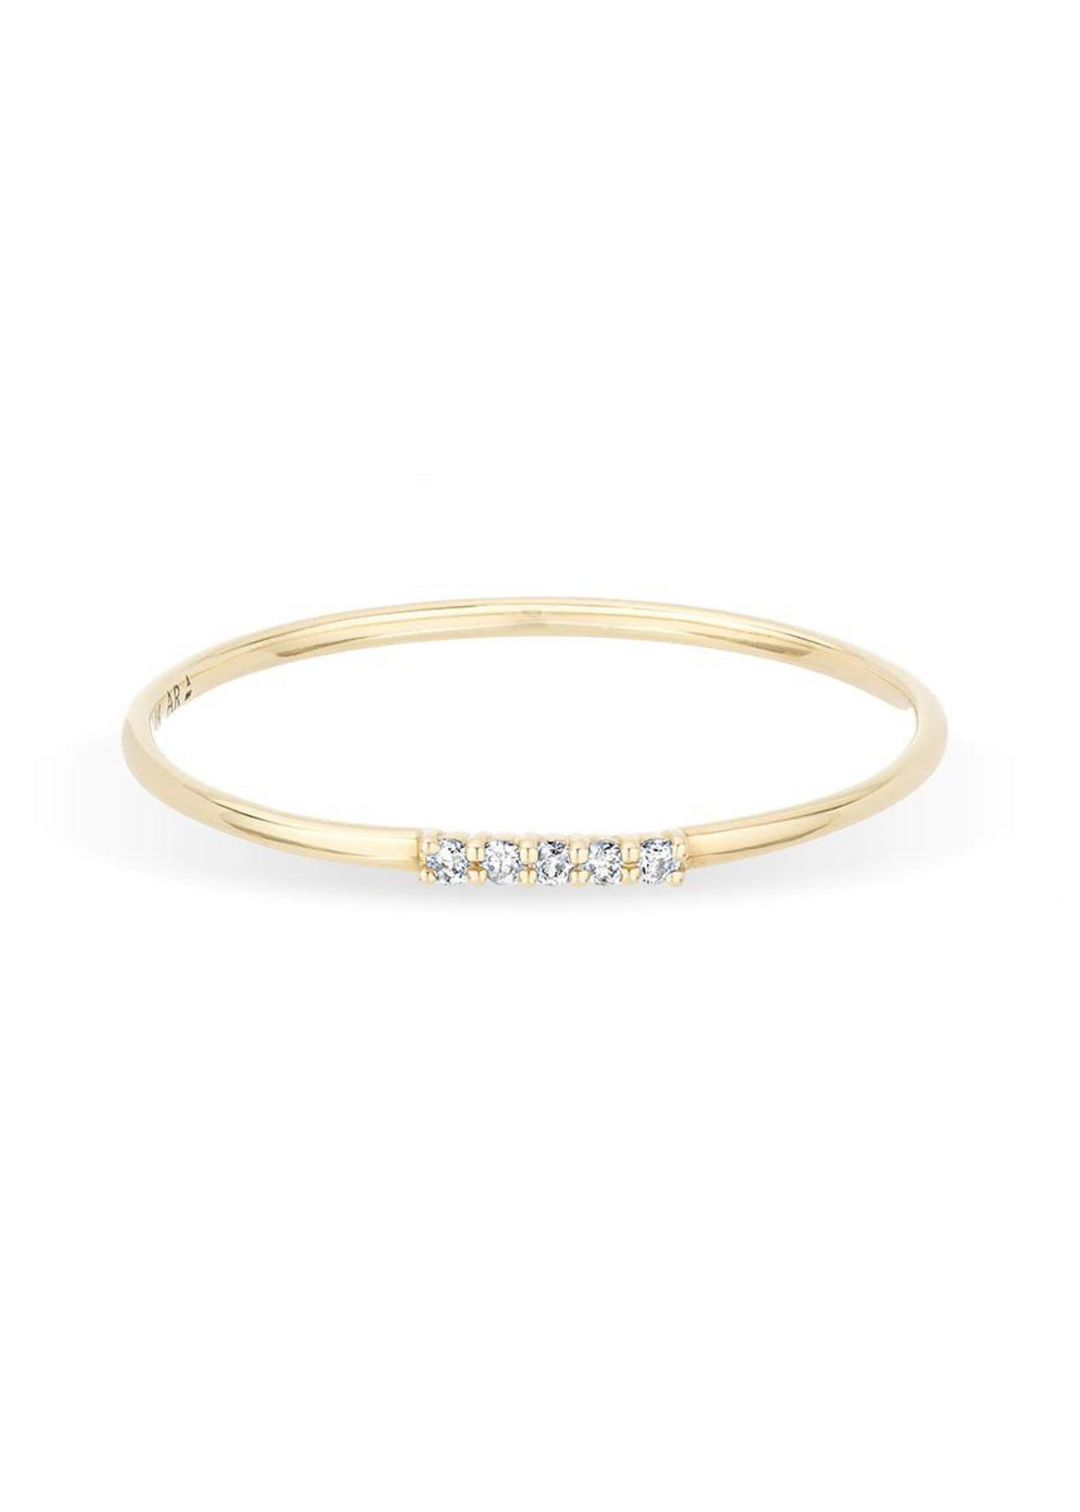 Super Tiny Pave Dash Stacking Ring - Y14